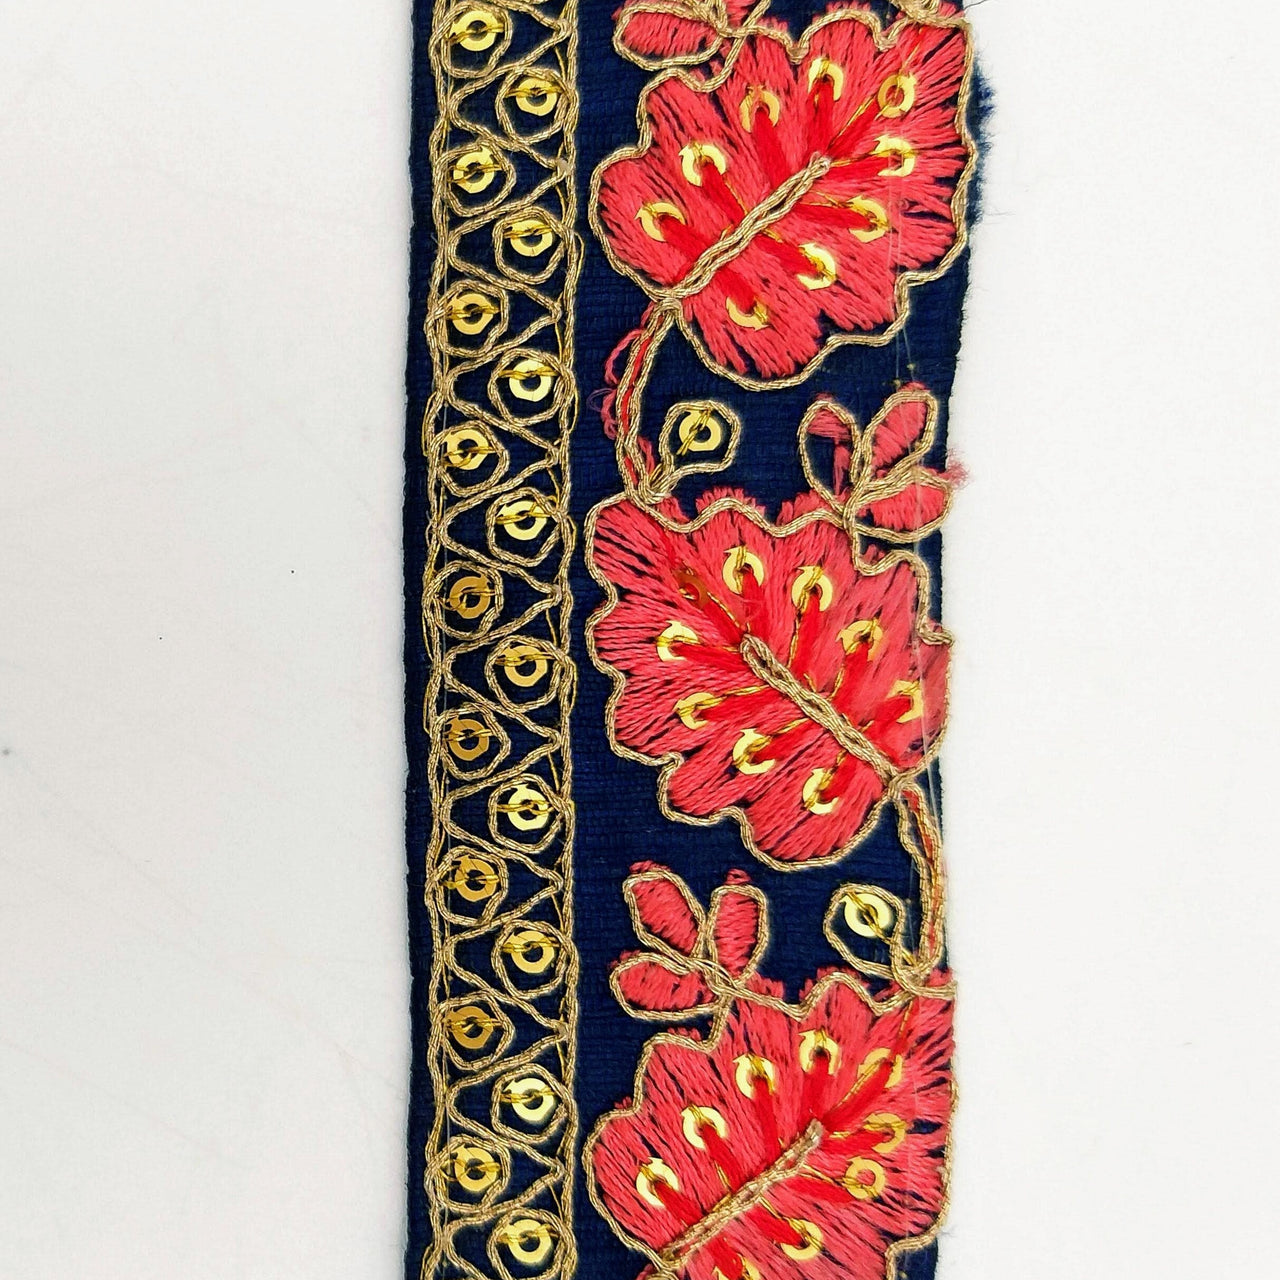 Navy Blue Trim with Floral Embroidery Salmon Pink Embroidered Leaves Trim, Decorative Trim, Indian Border